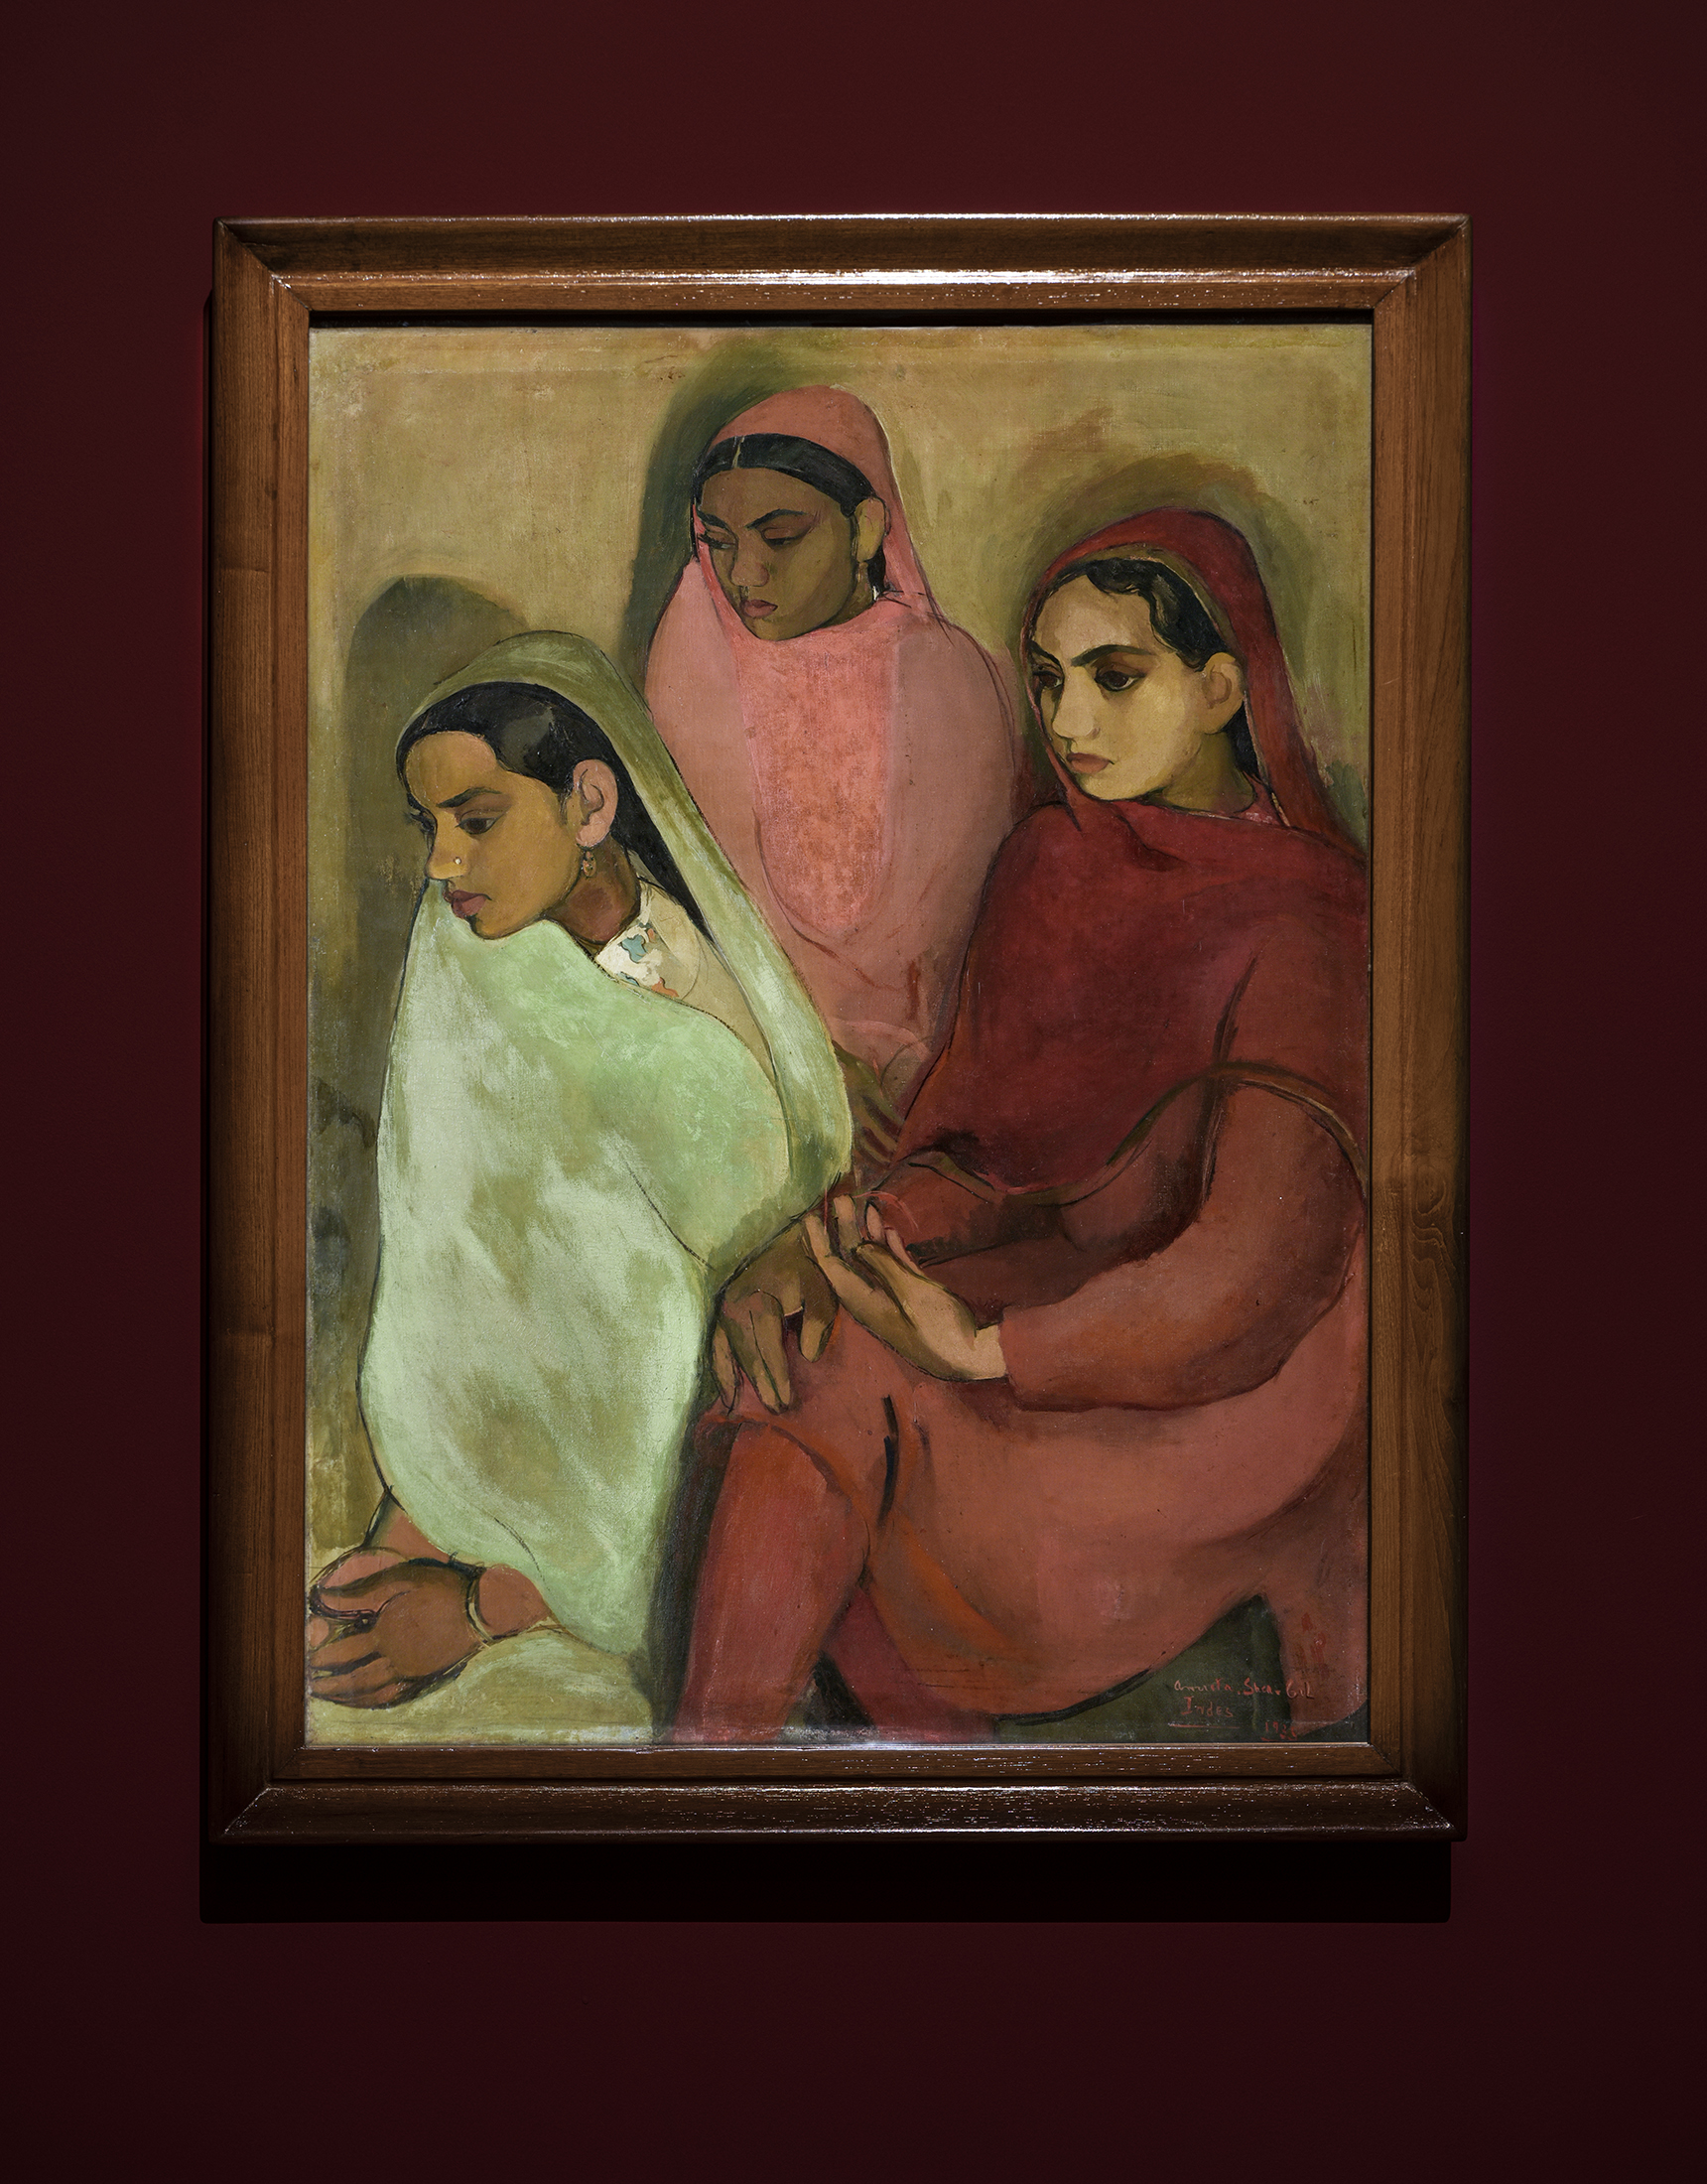 Installation view of Amrita Sher-Gil, Three Girls (1935). Courtesy of National Gallery of Modern Art, New Delhi. Image: Graham De Lacy